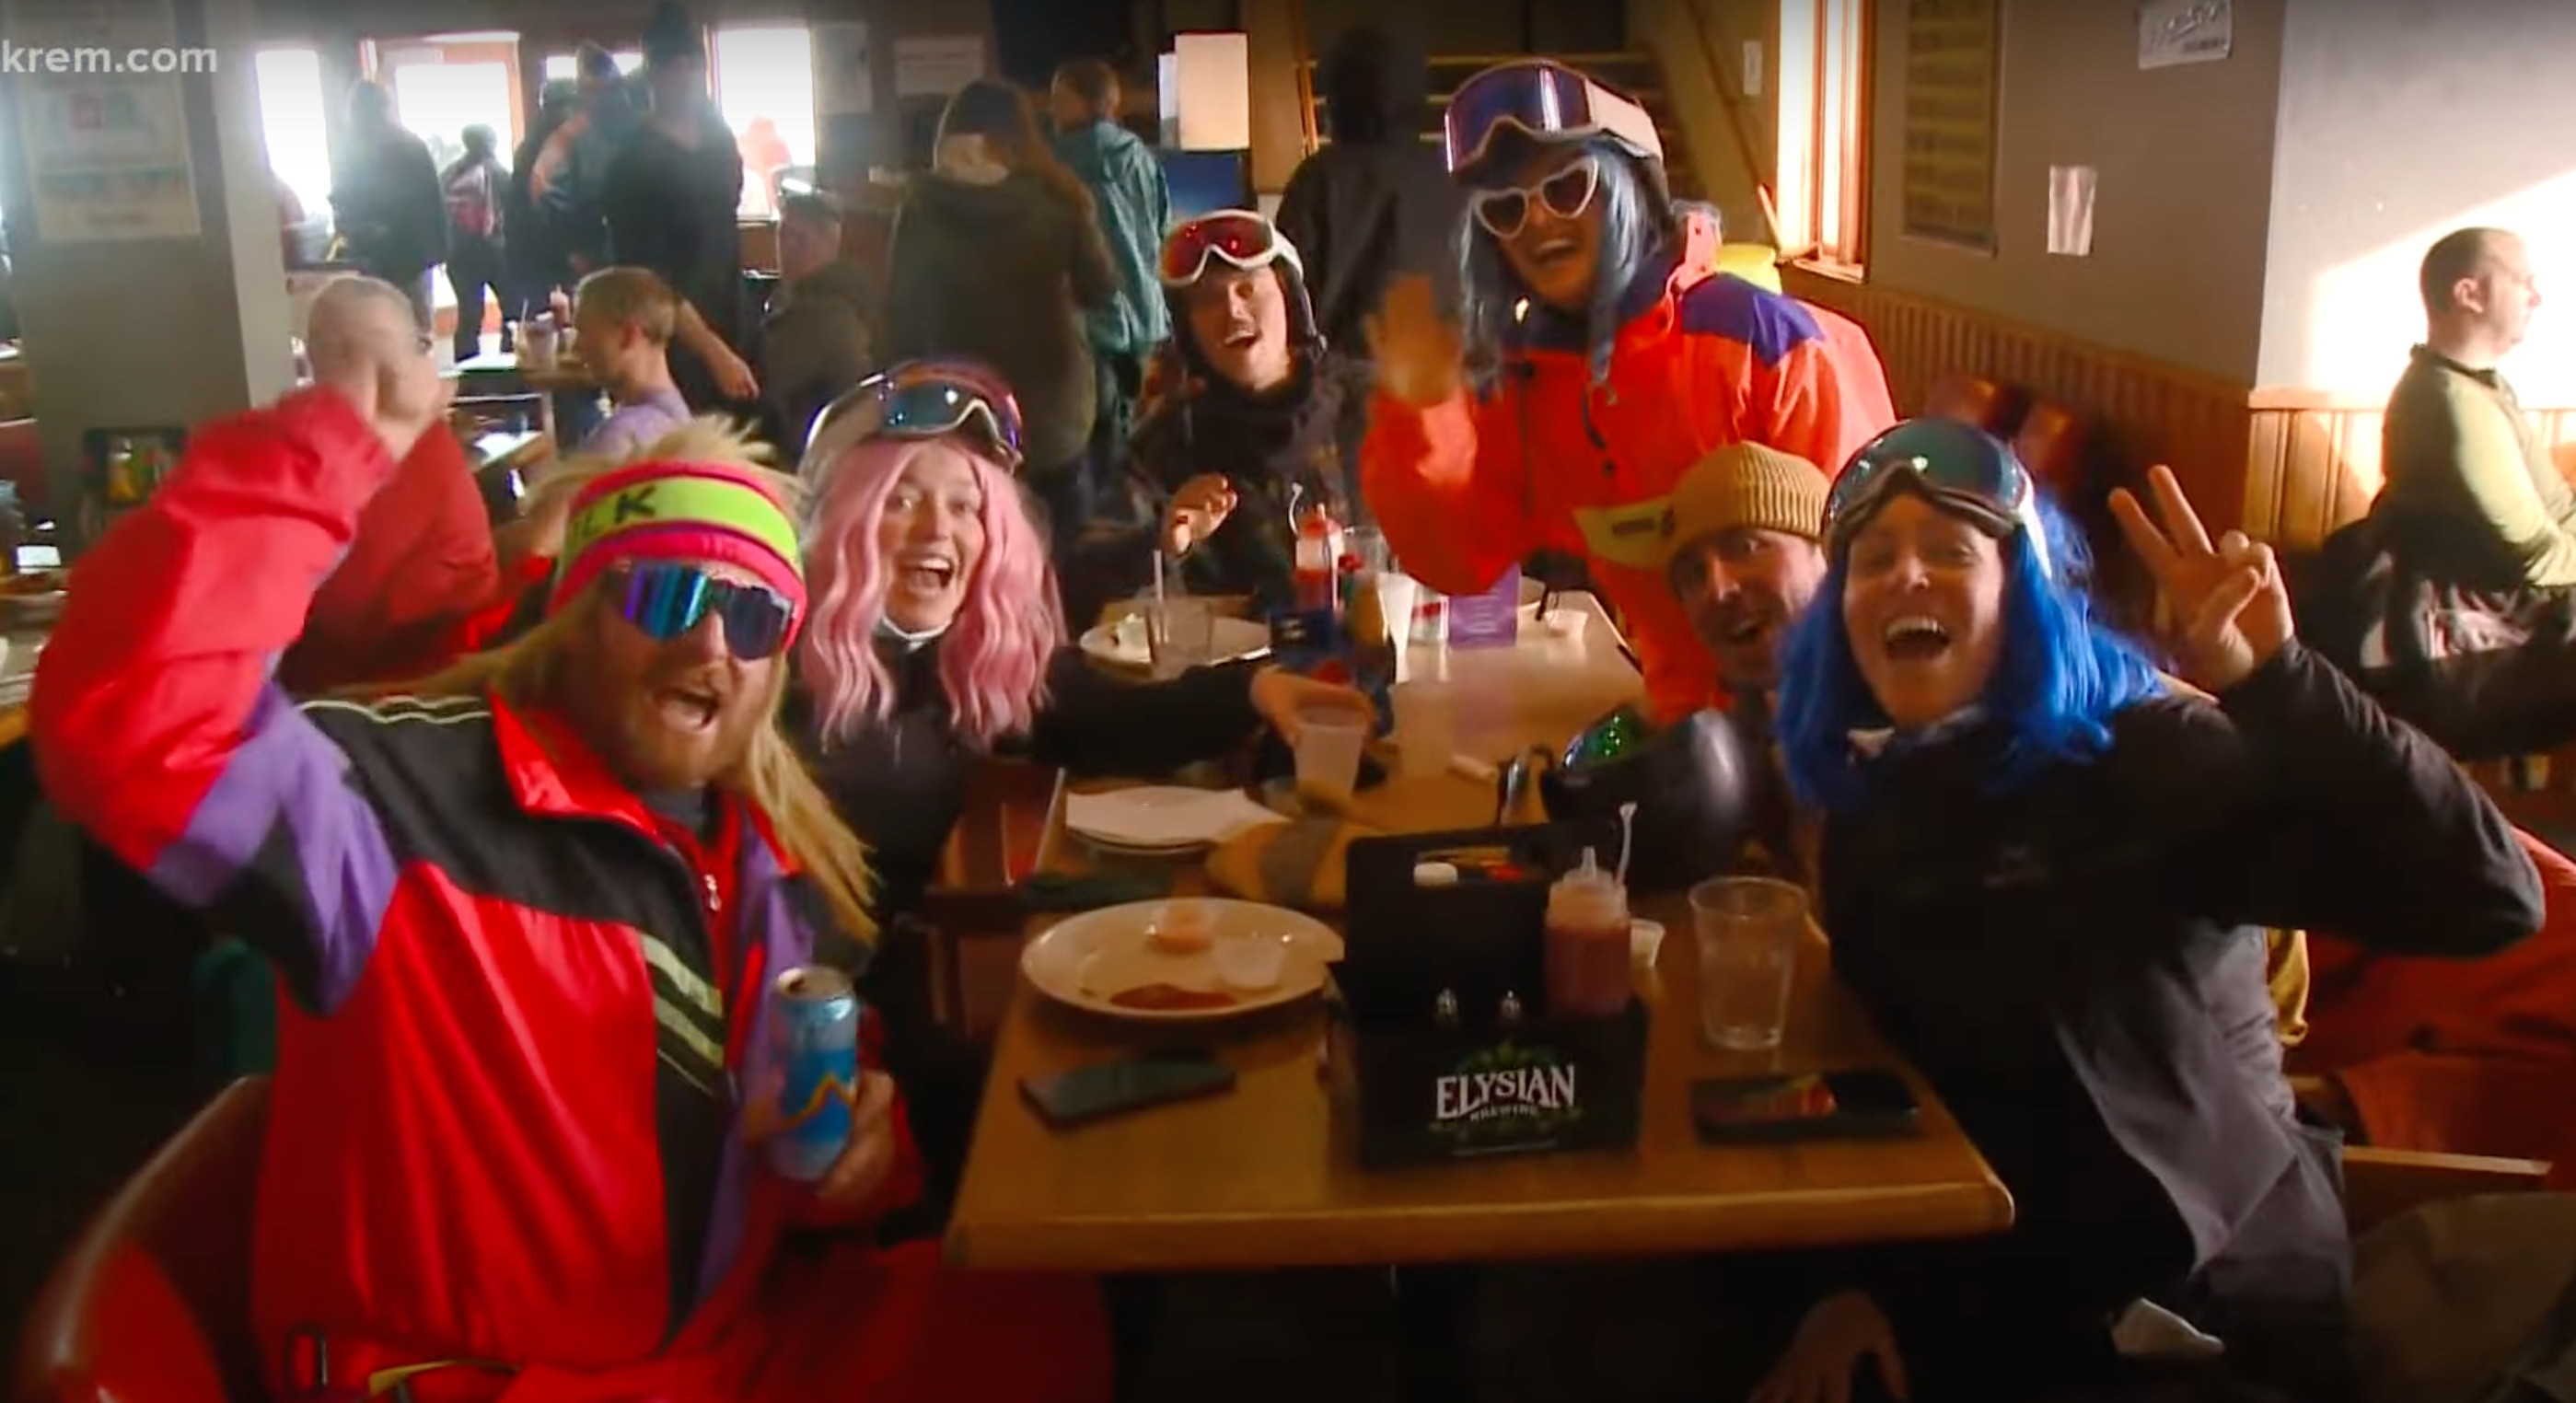 Silver Mountain Celebrates Jackass Day With Retro $18 Lift Tickets